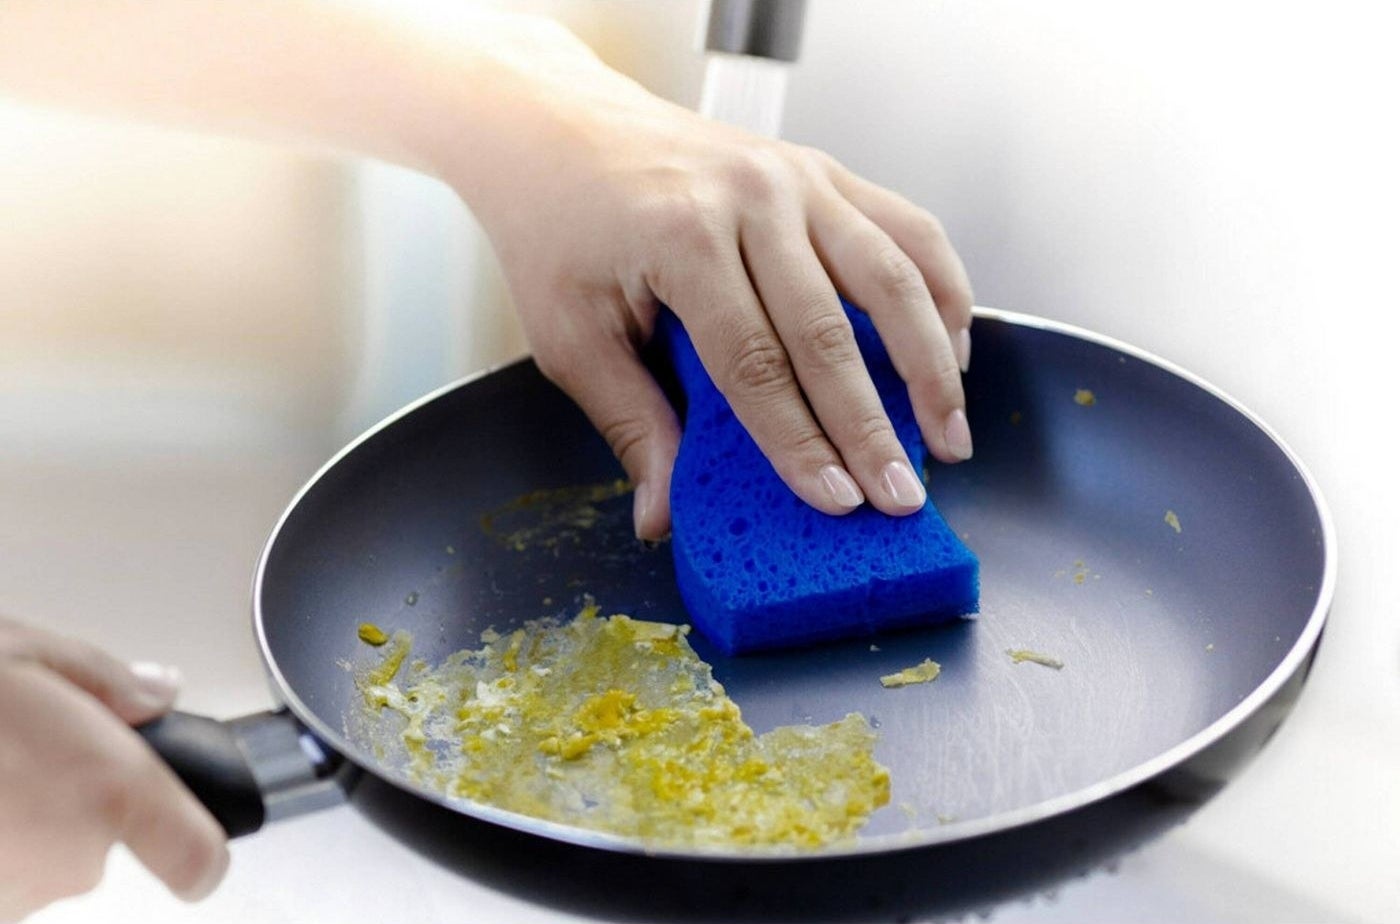 hand using the sponge to clean eggs from a skillet